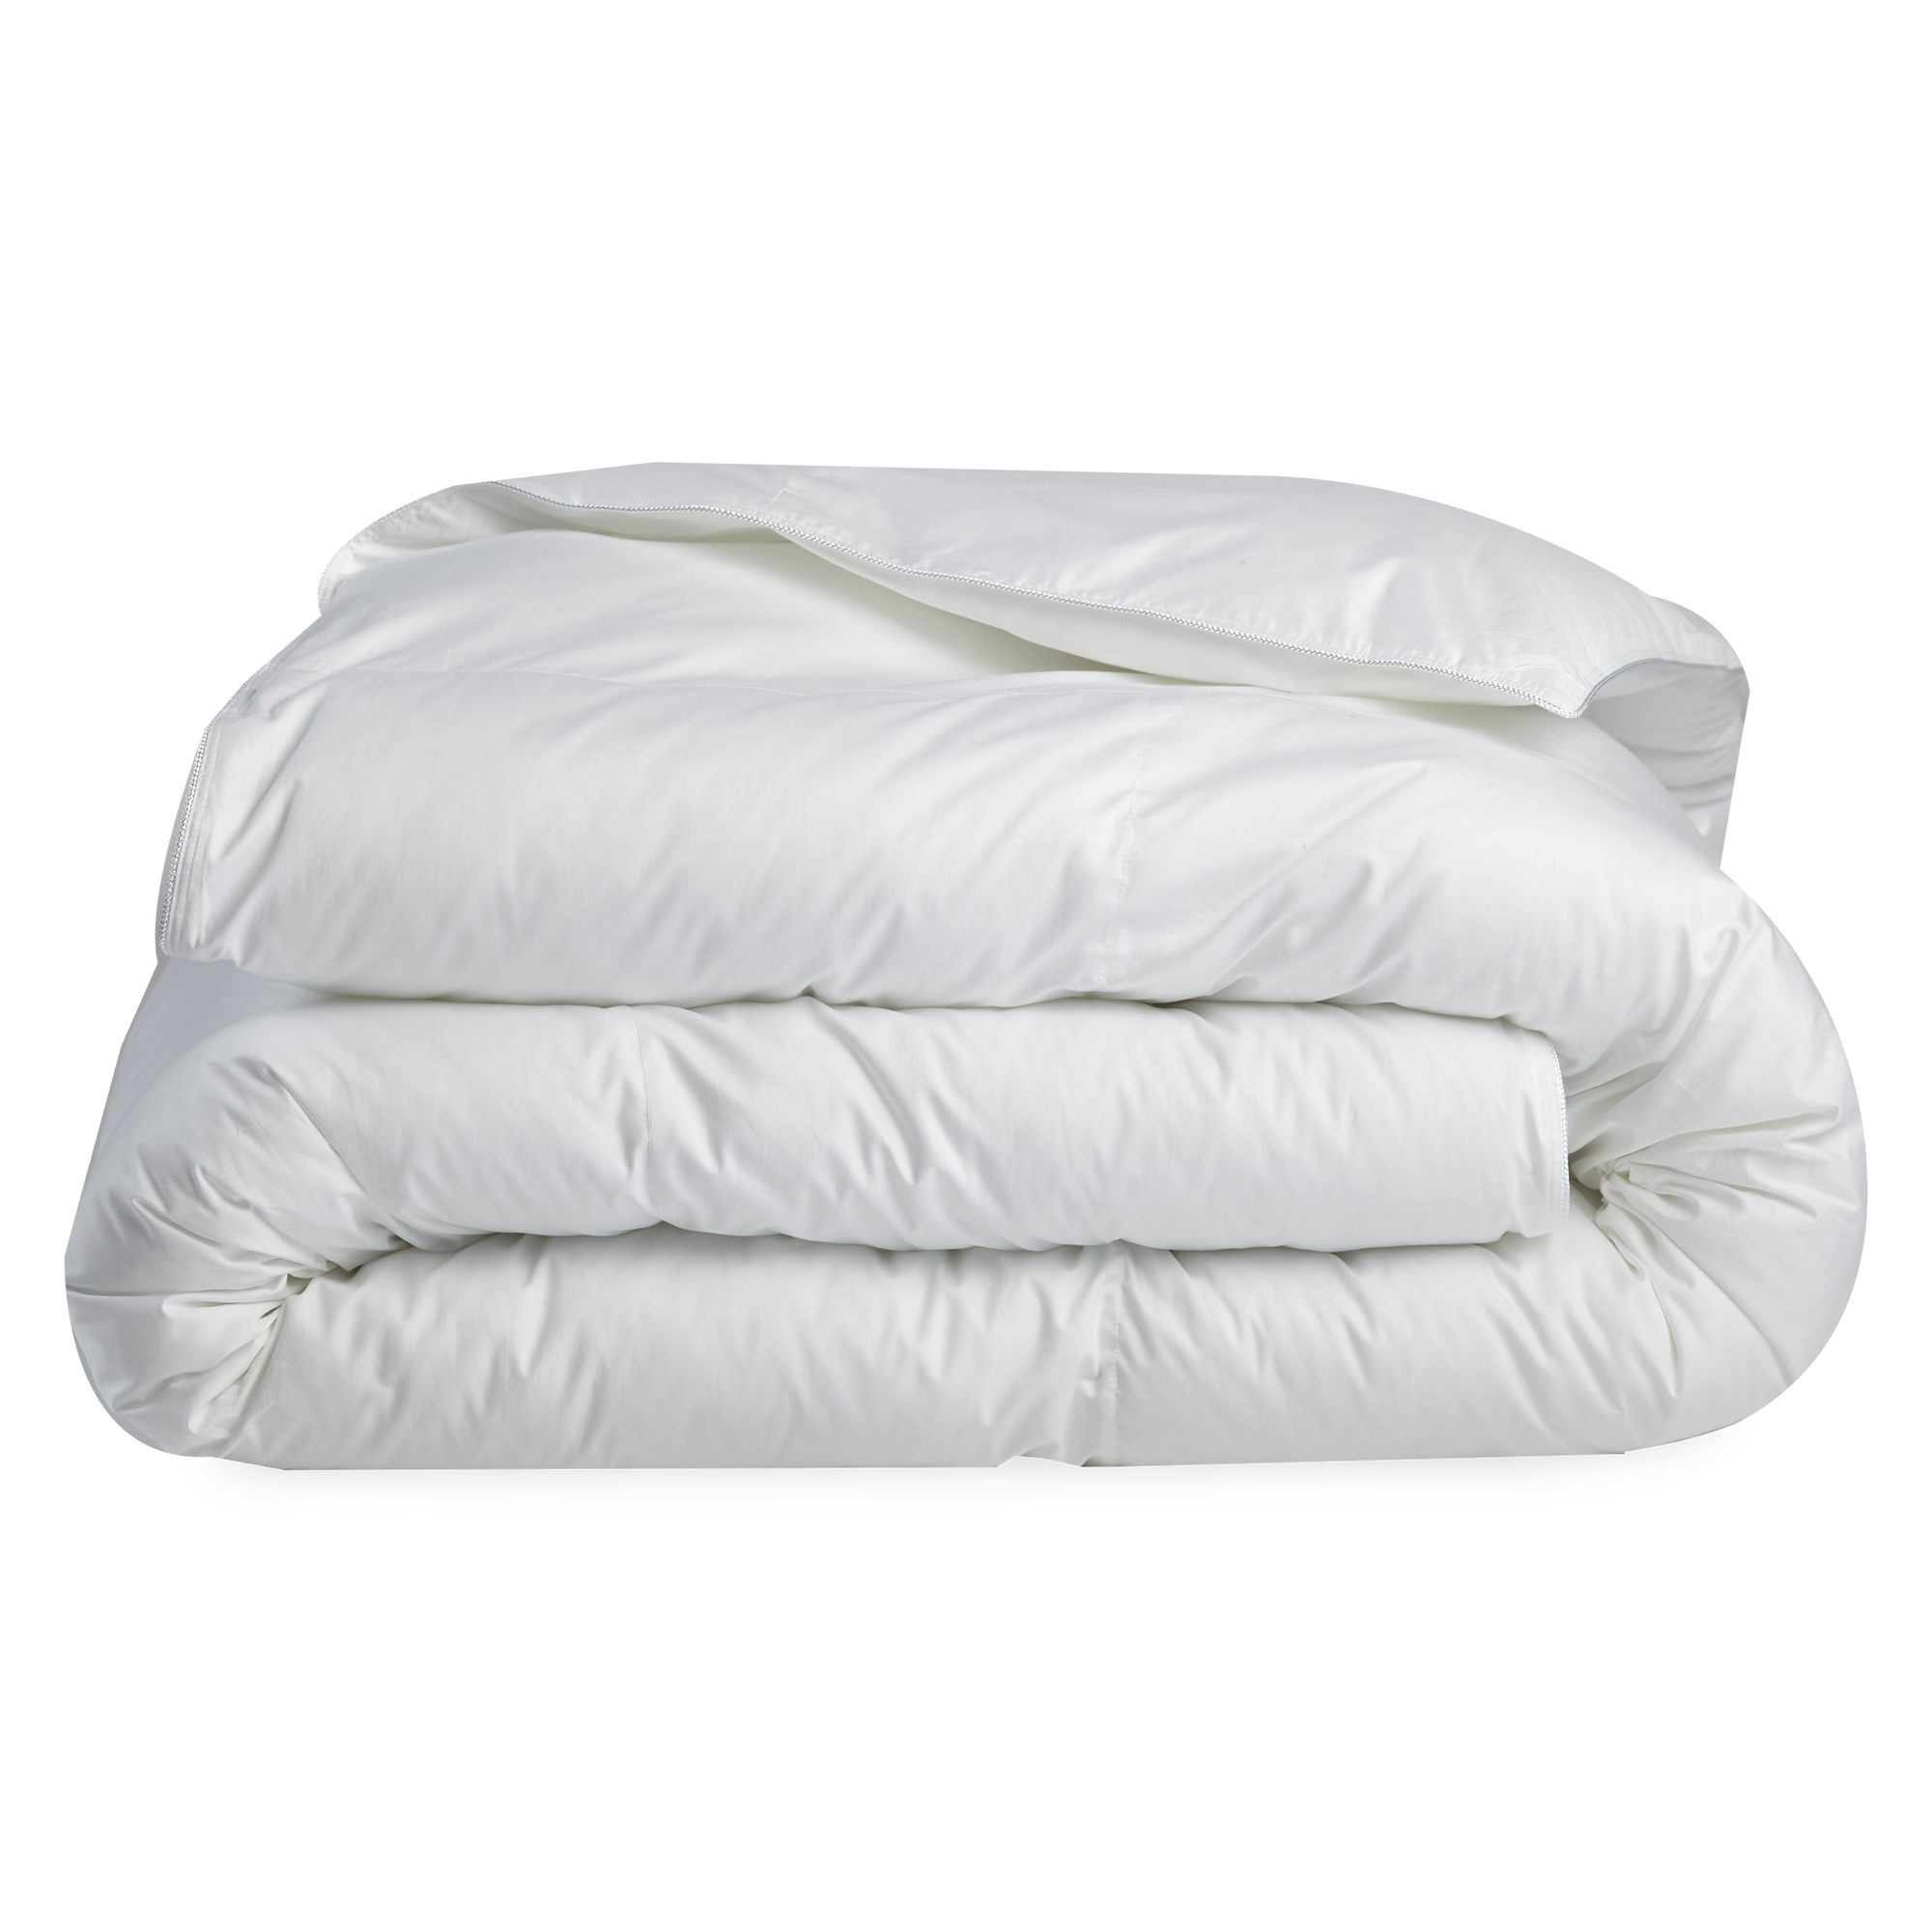 Offering warmth and luxury, our down alternative duvet is designed to mimic the comfort and loft of natural down, while remaining hypoallergenic.